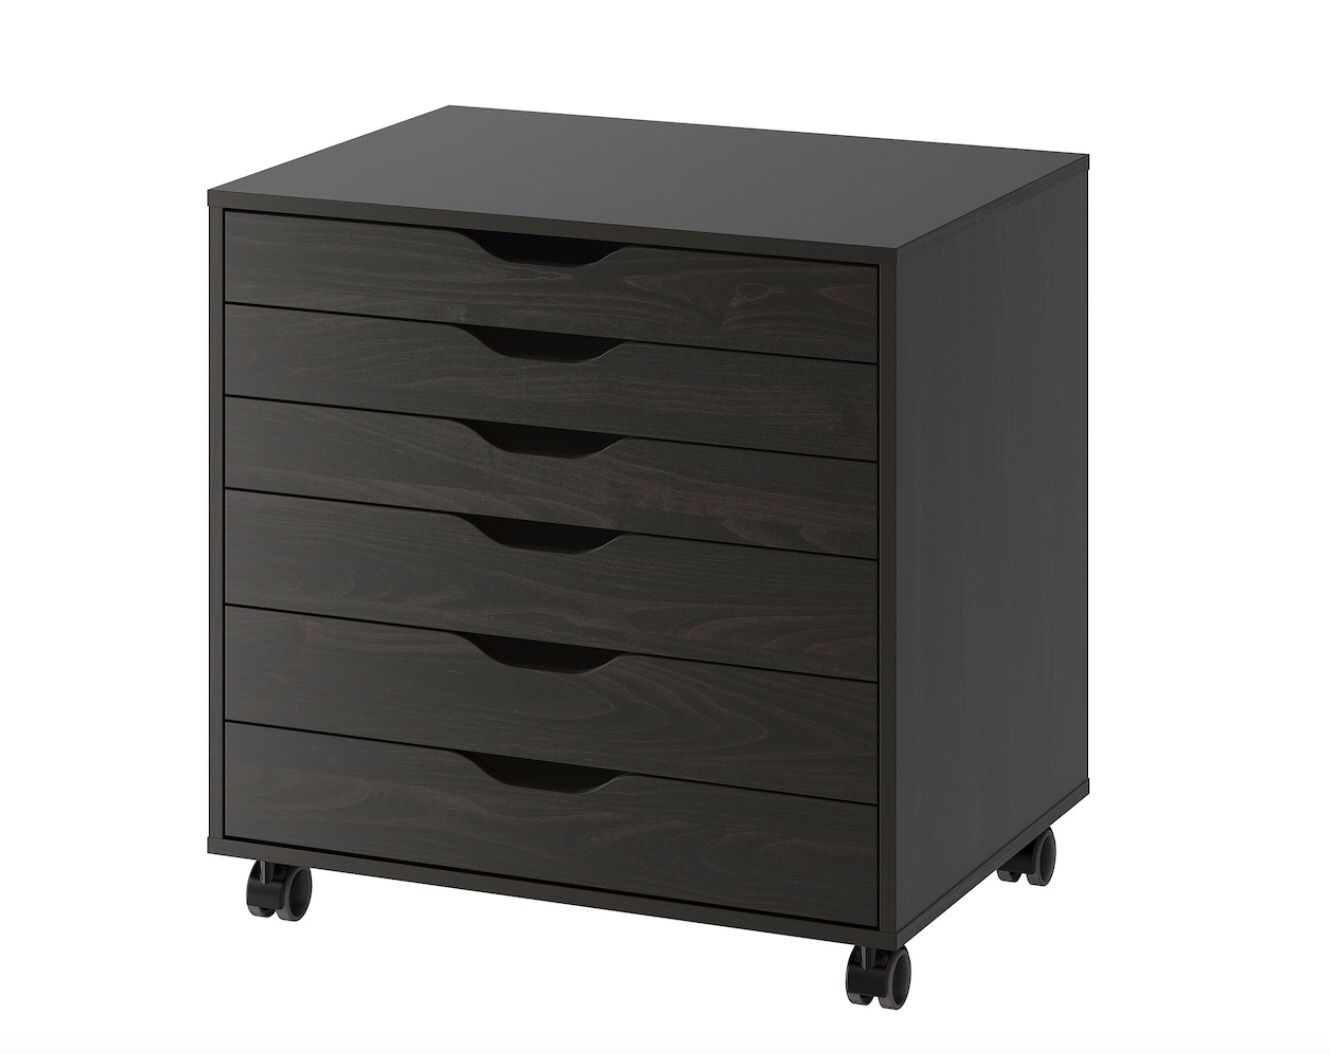 Two IKEA Alex Rolling Drawers (Dresser, Office/Tool/Kitchen Storage, End Tables)